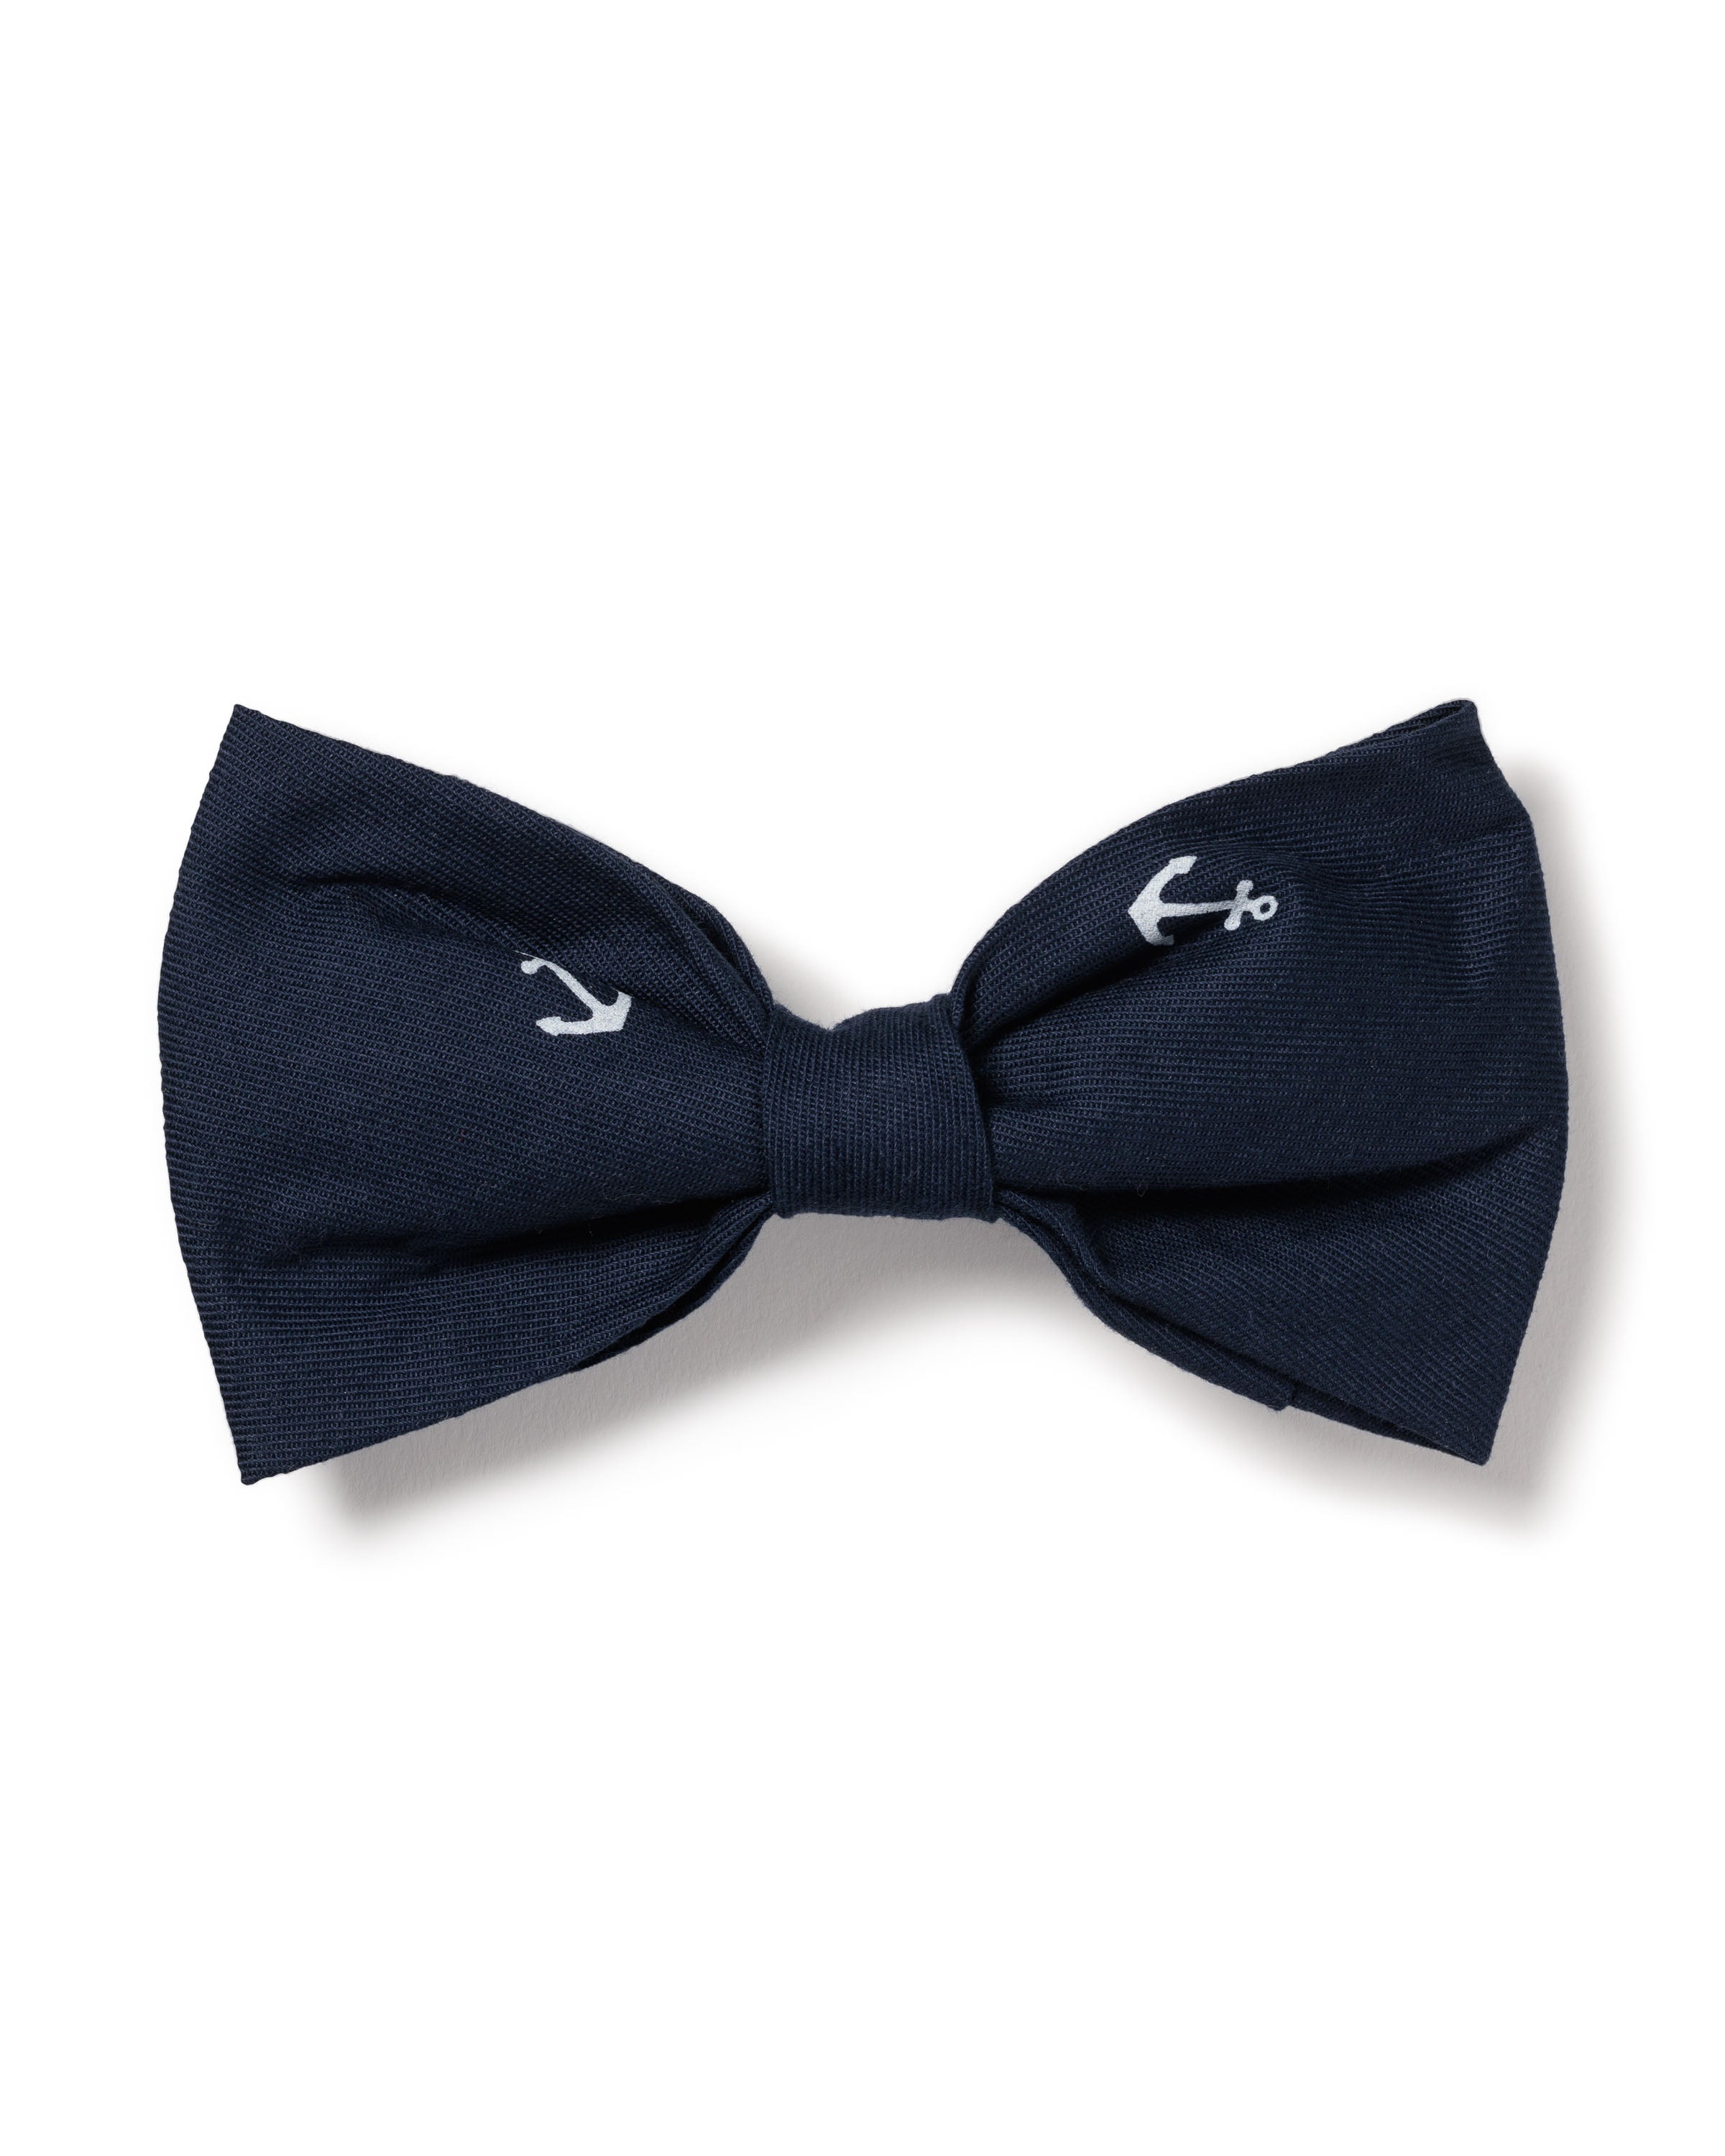 Dog Twill Bow Tie in Portsmouth Anchors